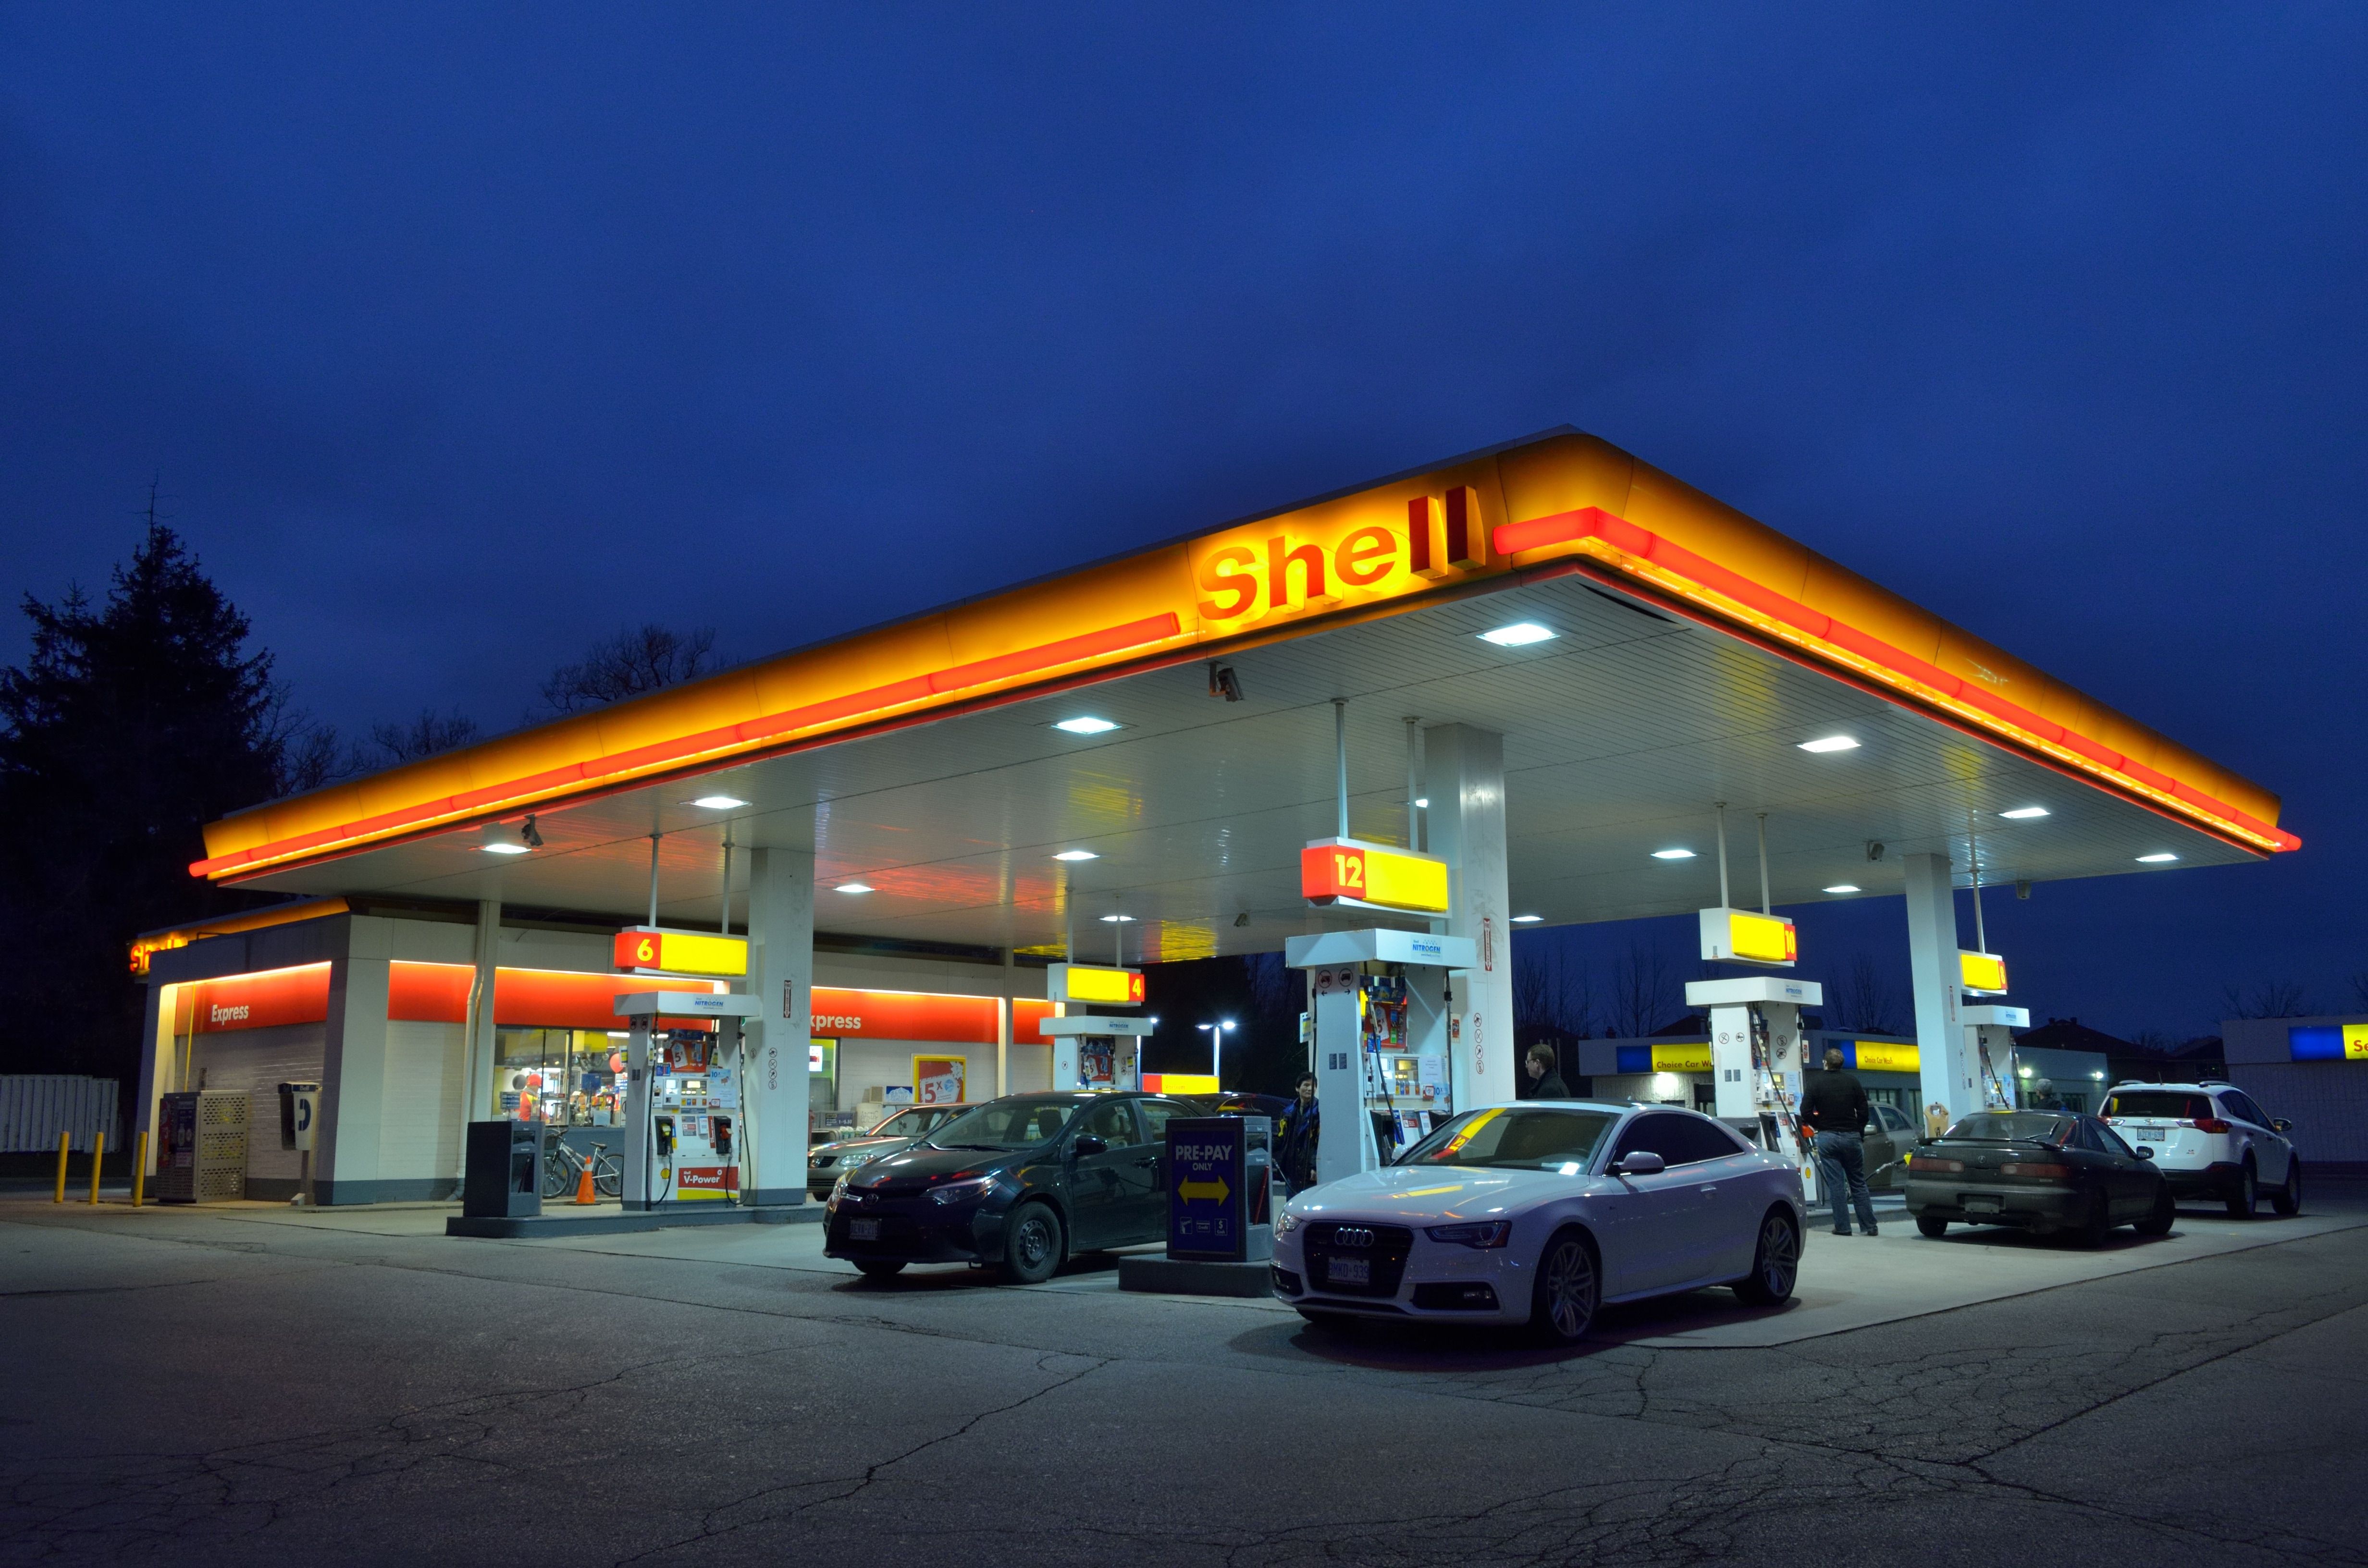 shell gas station free image